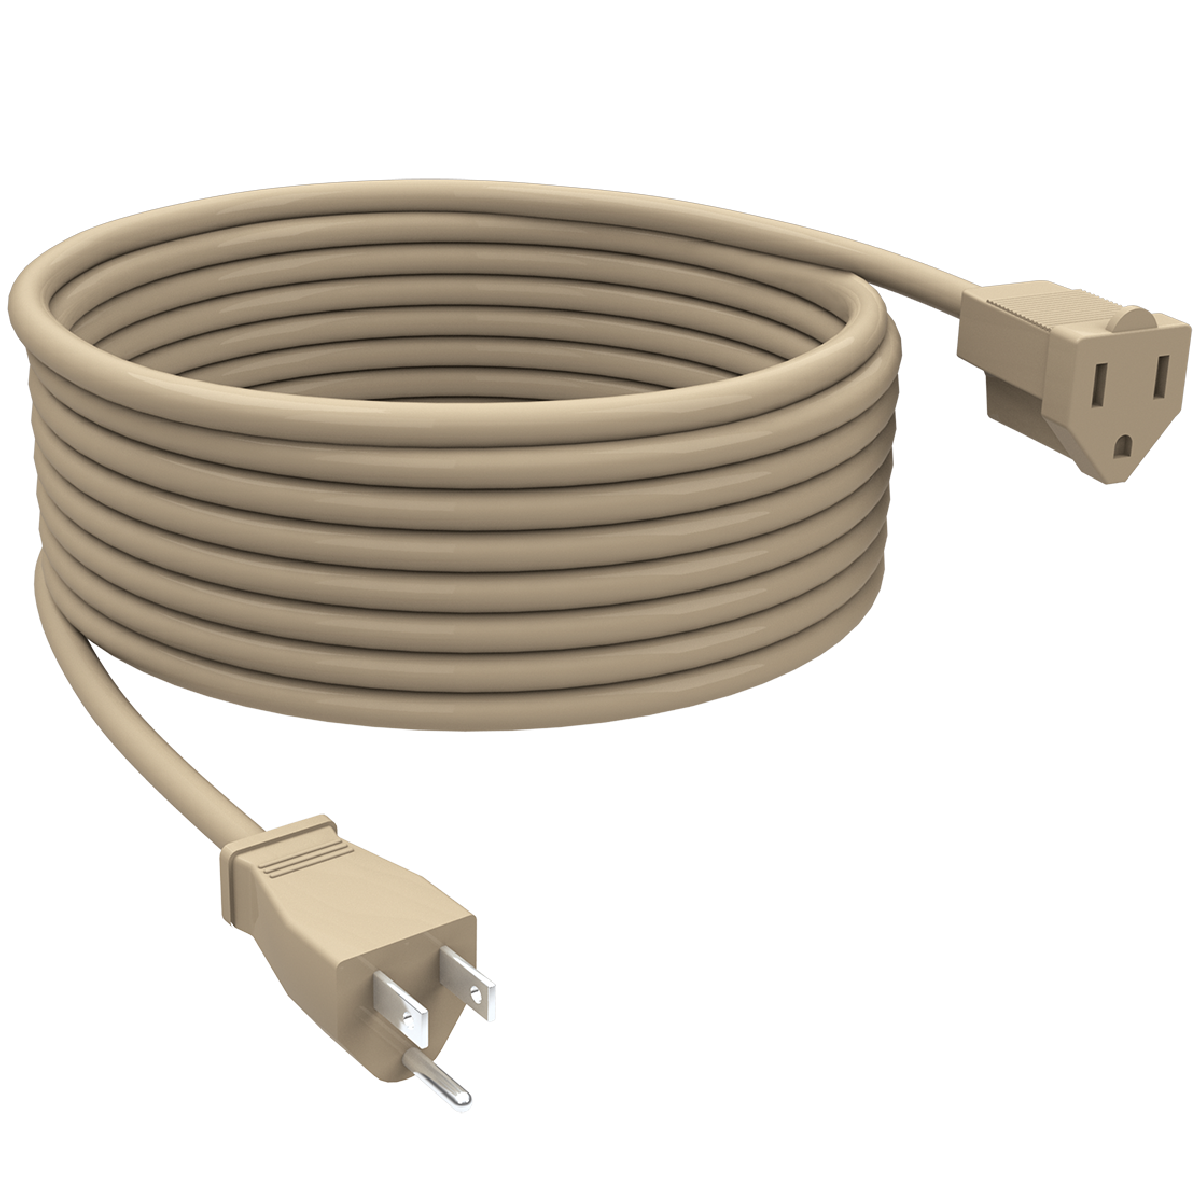 STANLEY DECK CORD 40 - Stanley Electrical Accessories